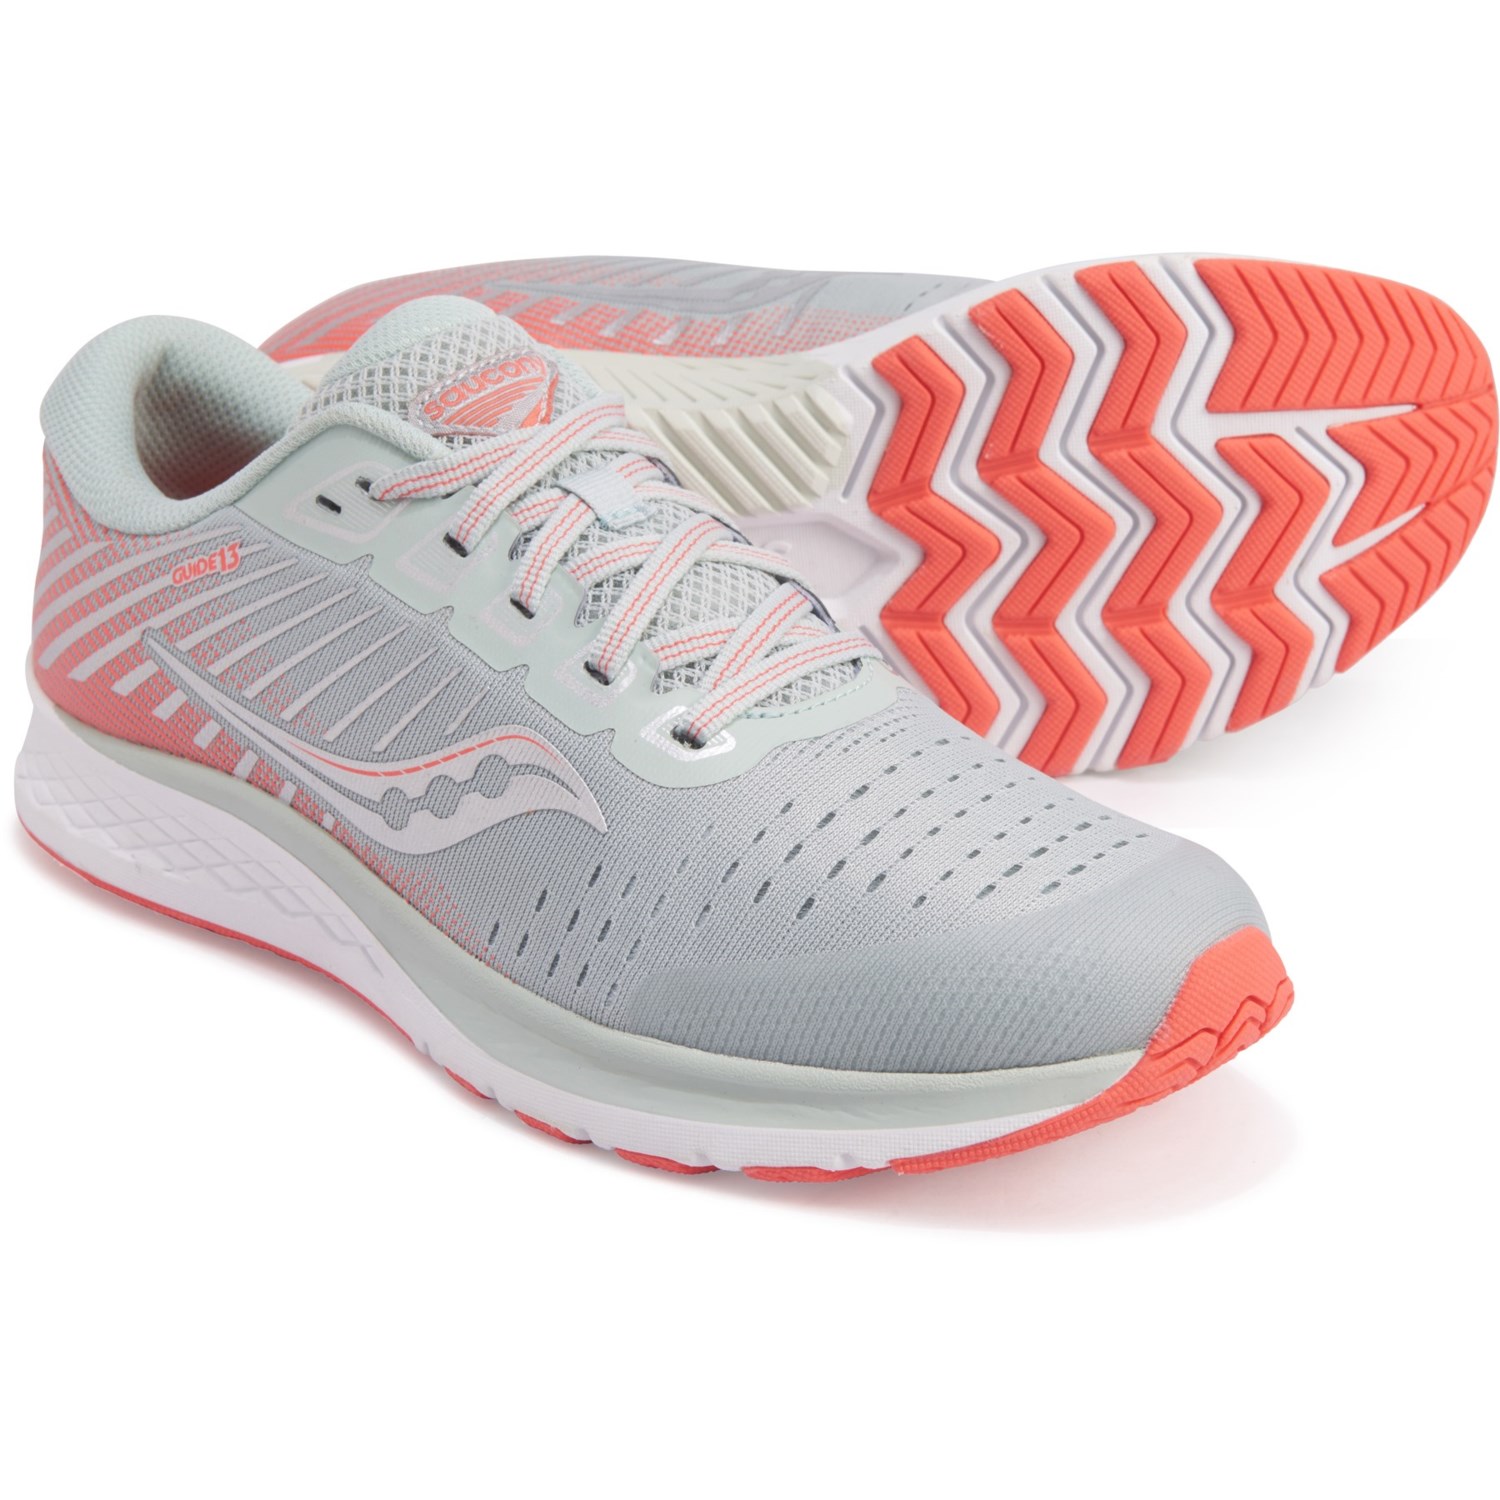 saucony running shoes athlete's foot